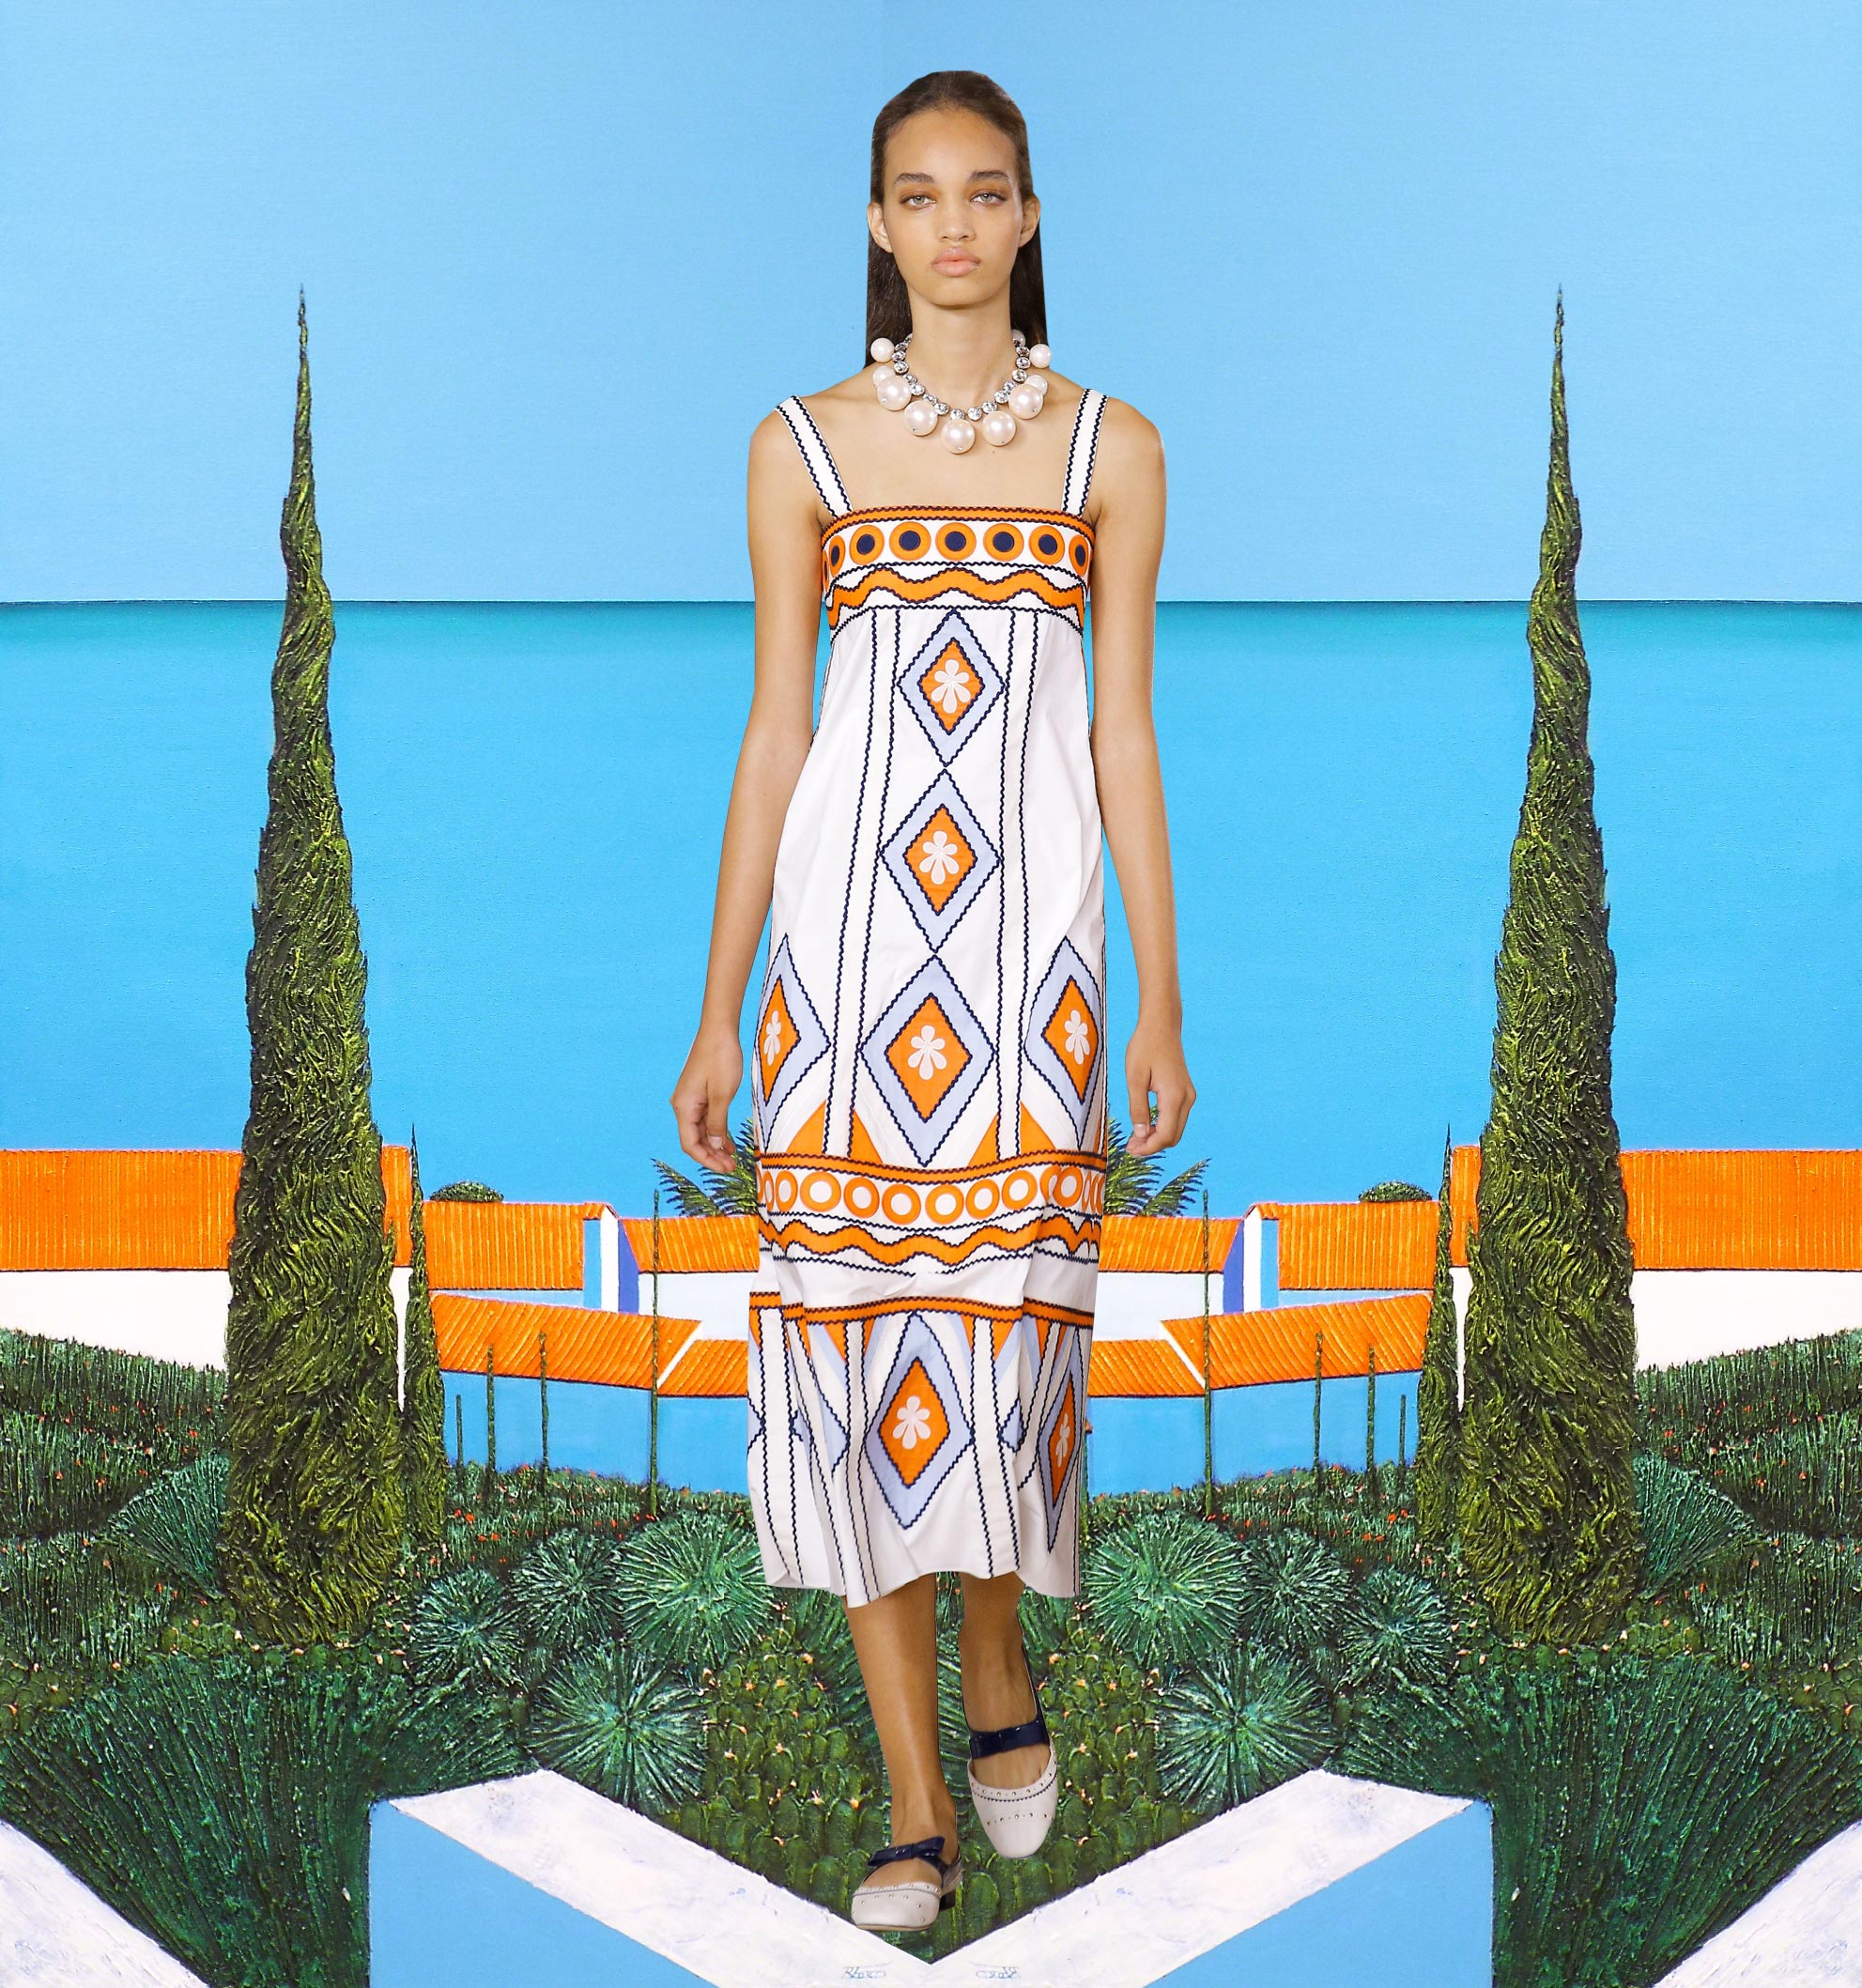 Tory Burch / RONNIE FORD, Hilltop Village, Provence 2